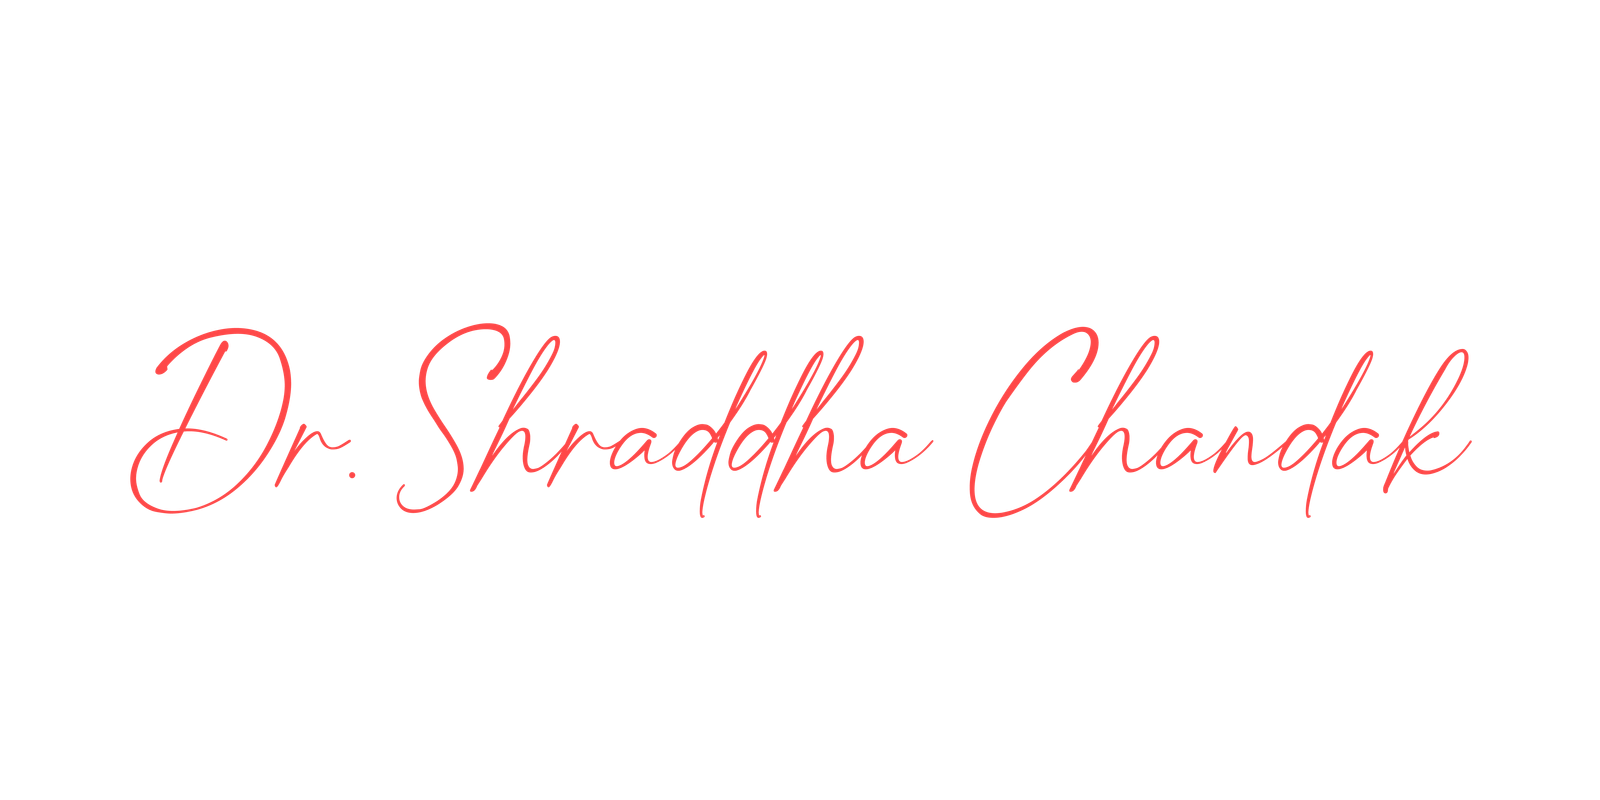 The official website of Dr Shraddha Chandak